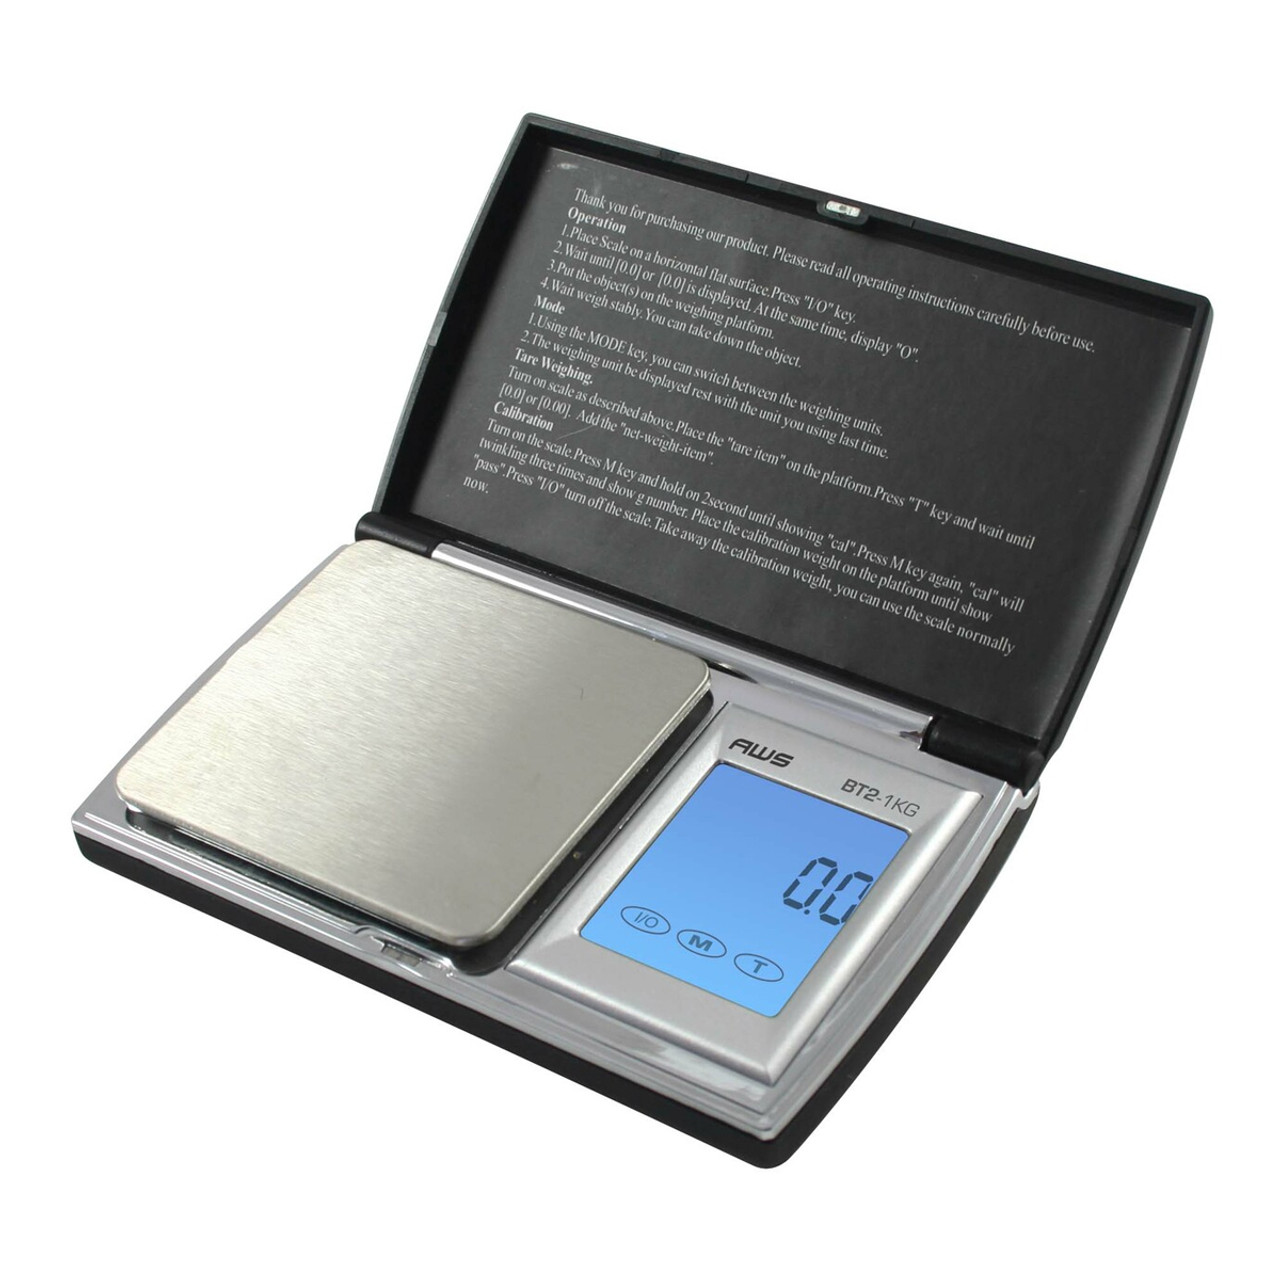 AND Weighing PV-Series Digital Pocket Scales - Prime USA Scales